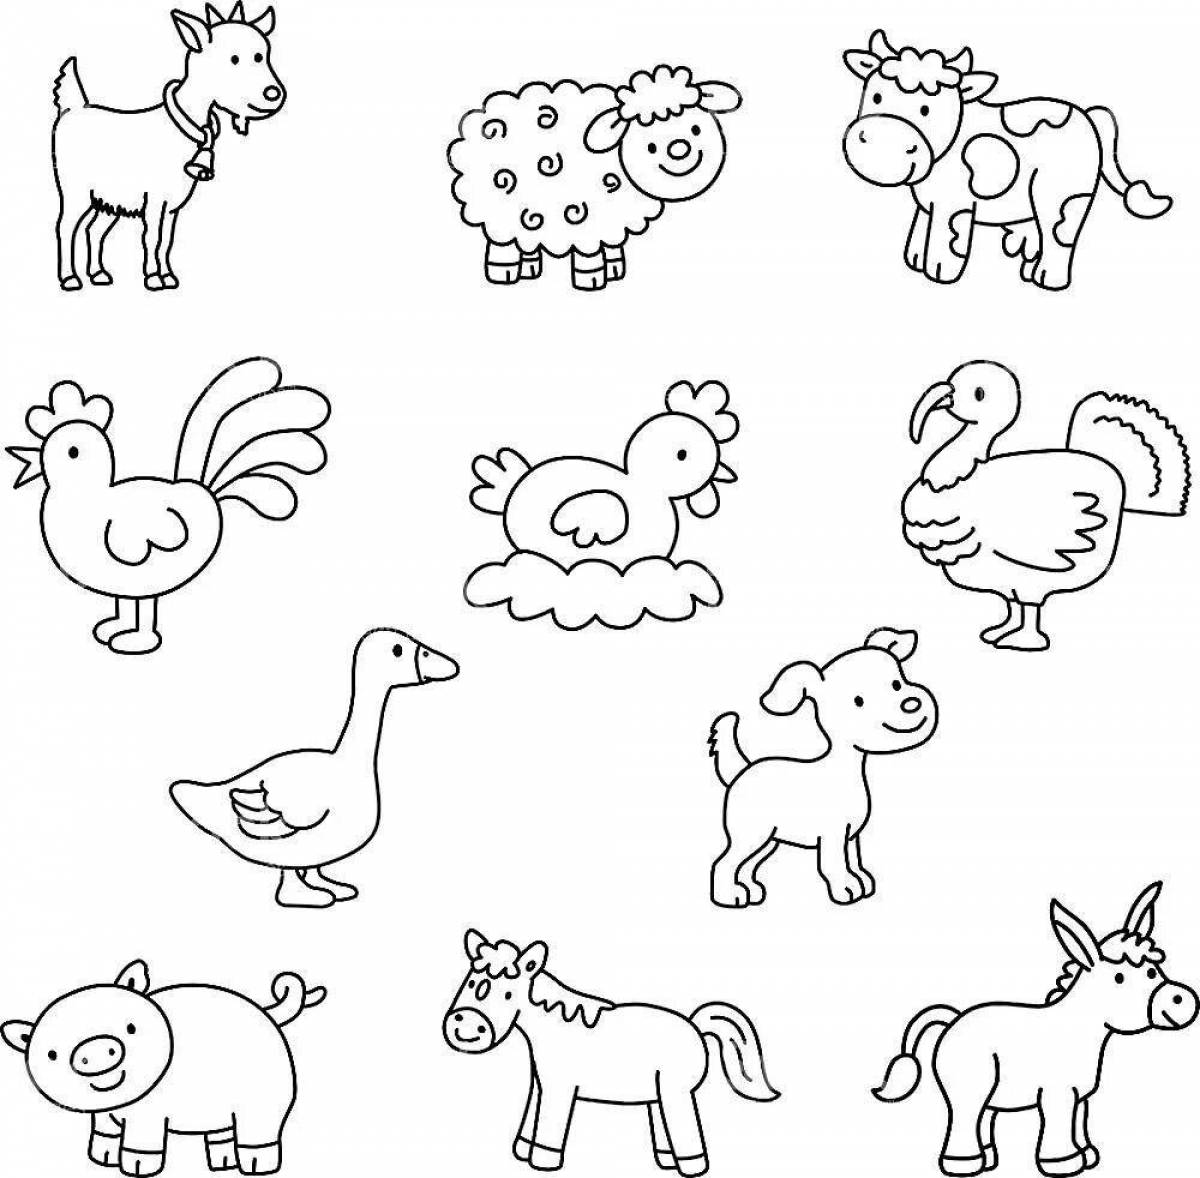 Color-mania coloring pages for kids